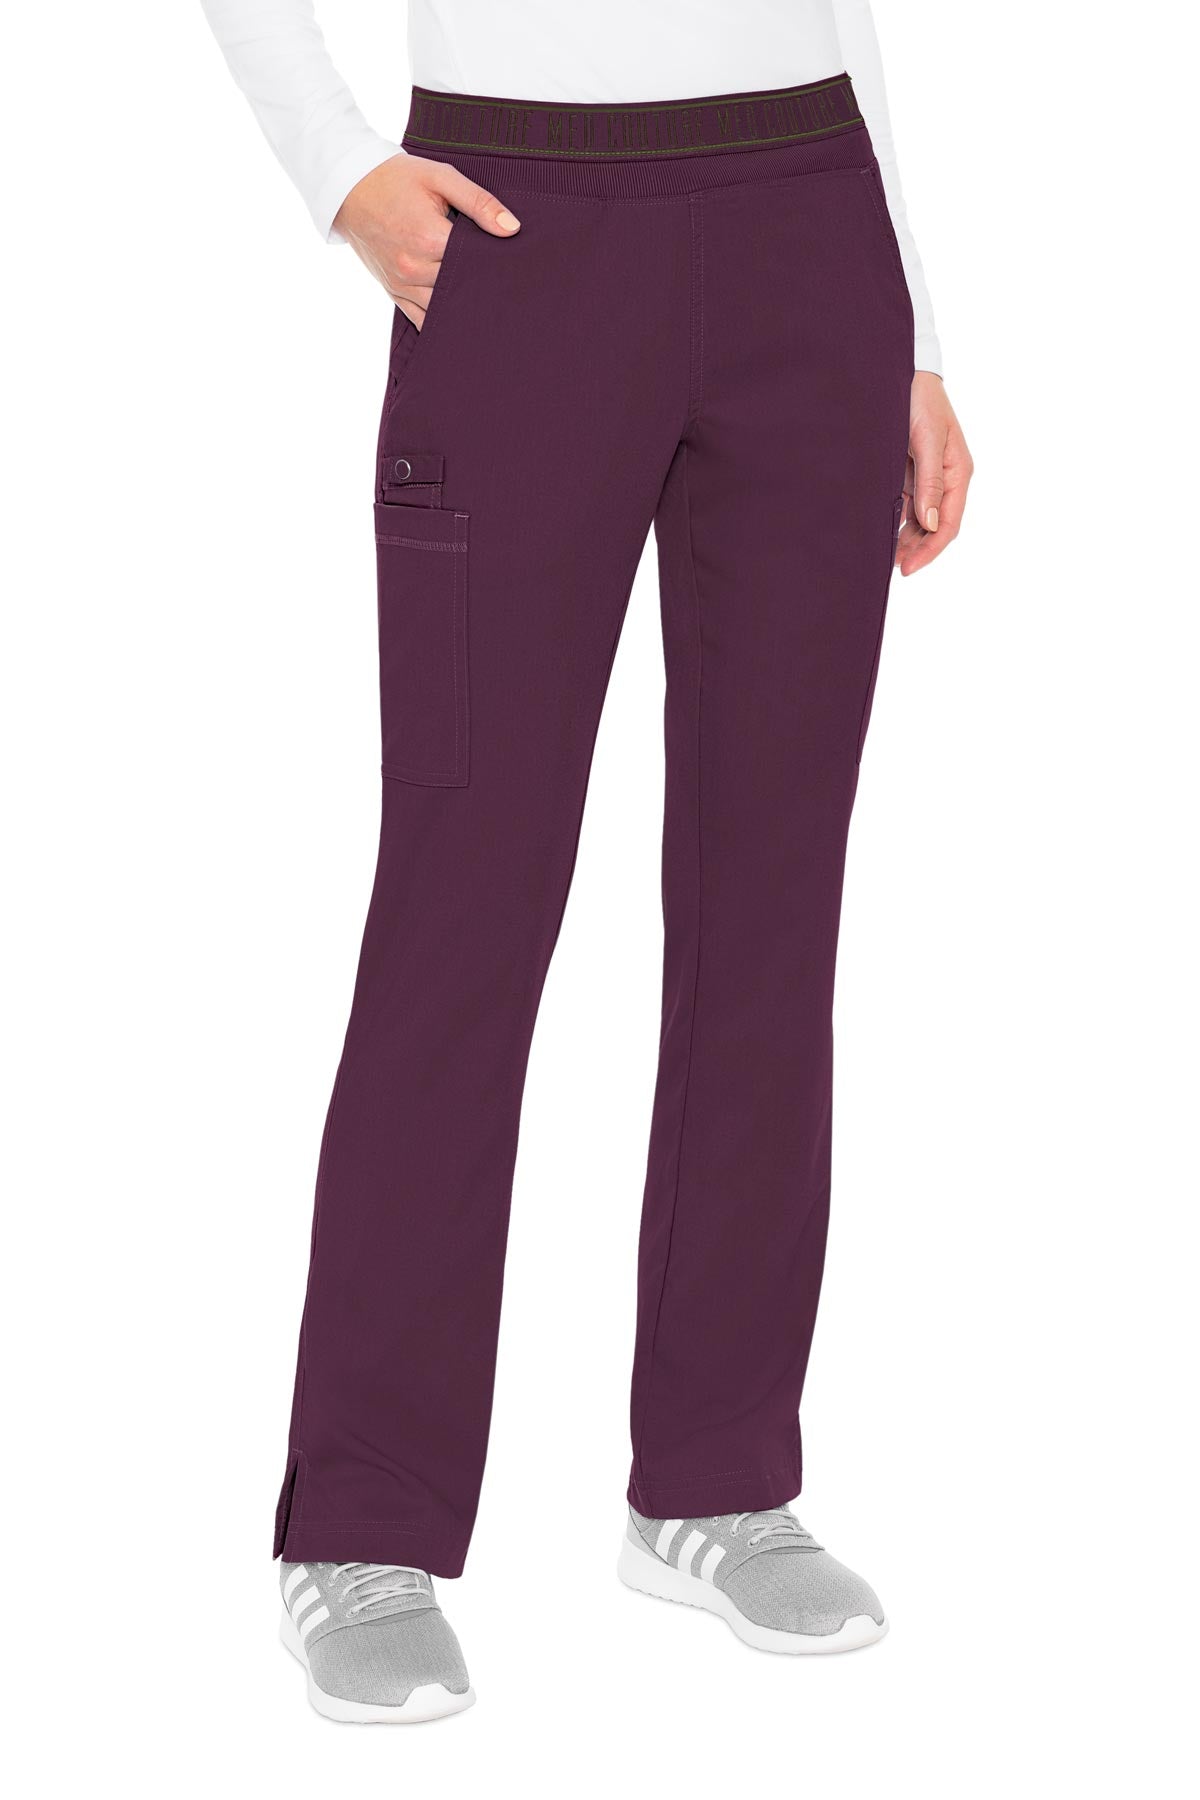 7739 Med Couture Performance Touch Yoga 7 Pocket Cargo Pant